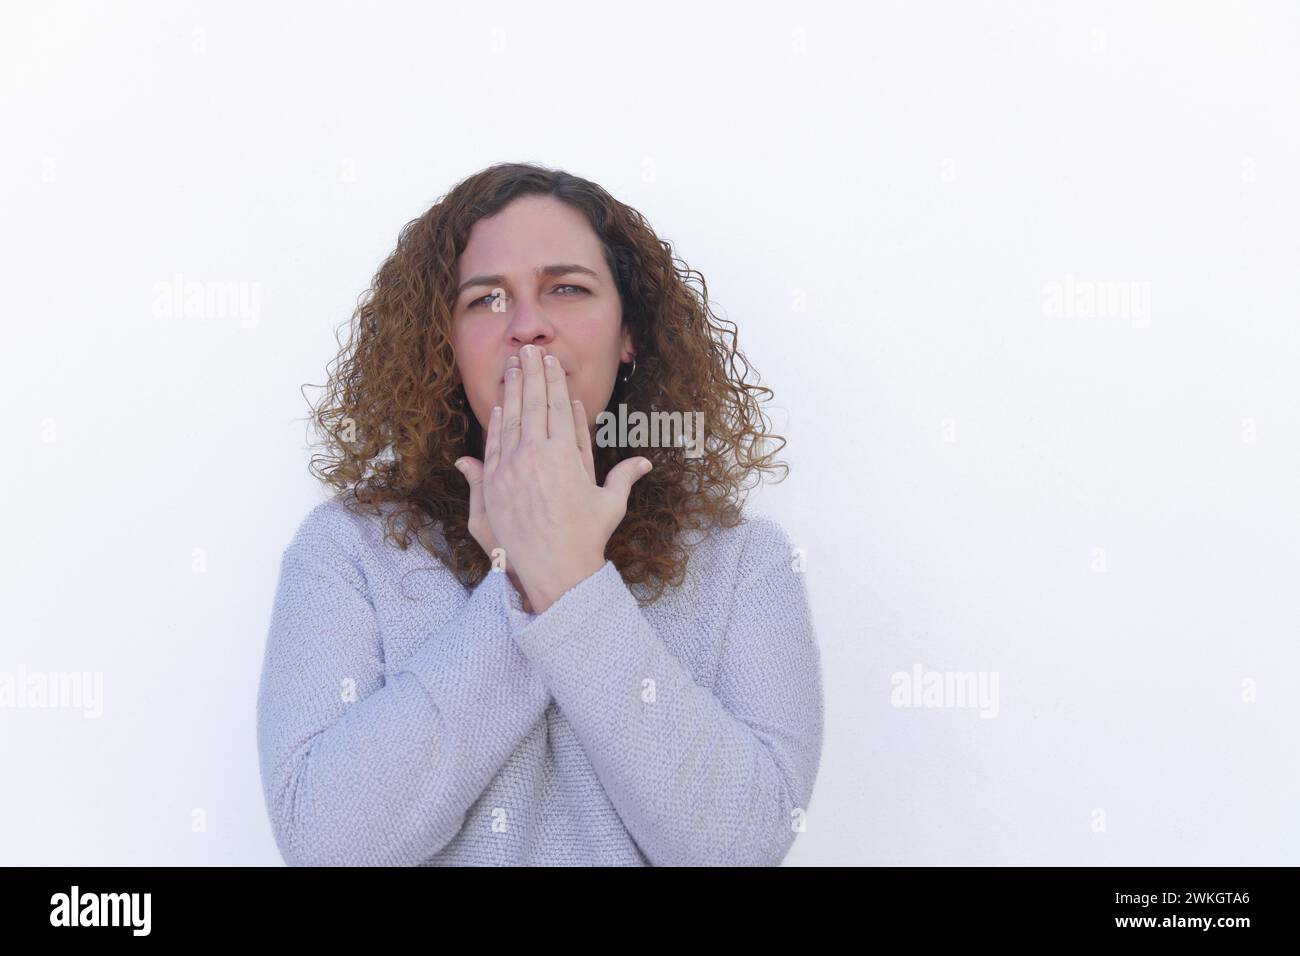 Attractive blonde woman with curly hair and blue eyes covering her mouth with her hands looking at the camera with white background and copy space Stock Photo